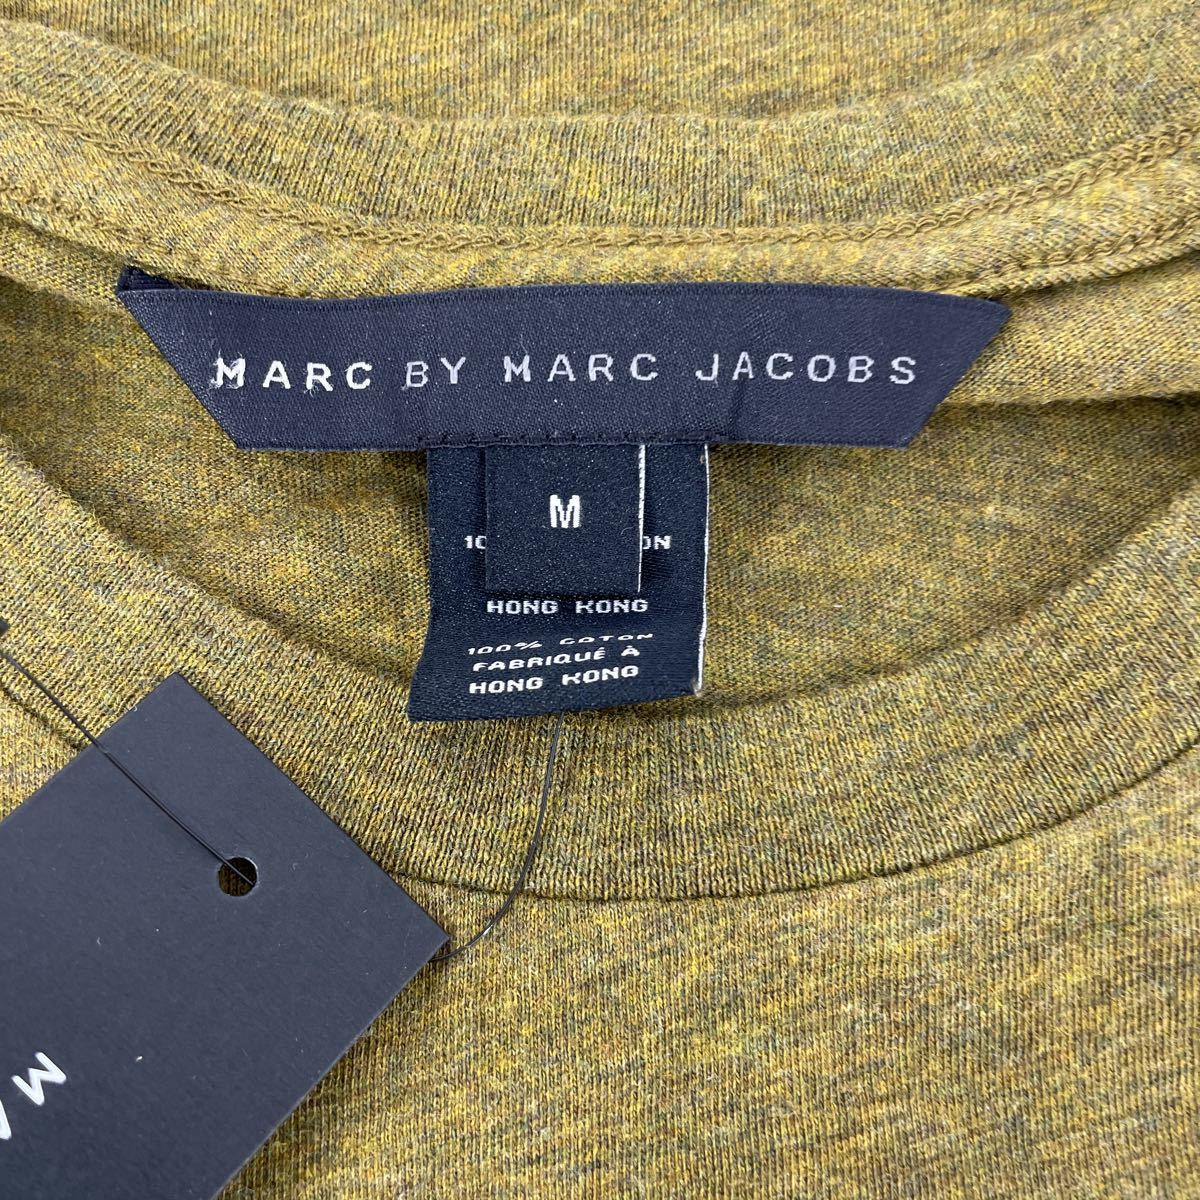 Marc by Marc Jacobs/ Mark Jacobs cotton 100% T-shirt ARMY MELANGE/M M4001580/ reference retail price \\10,450